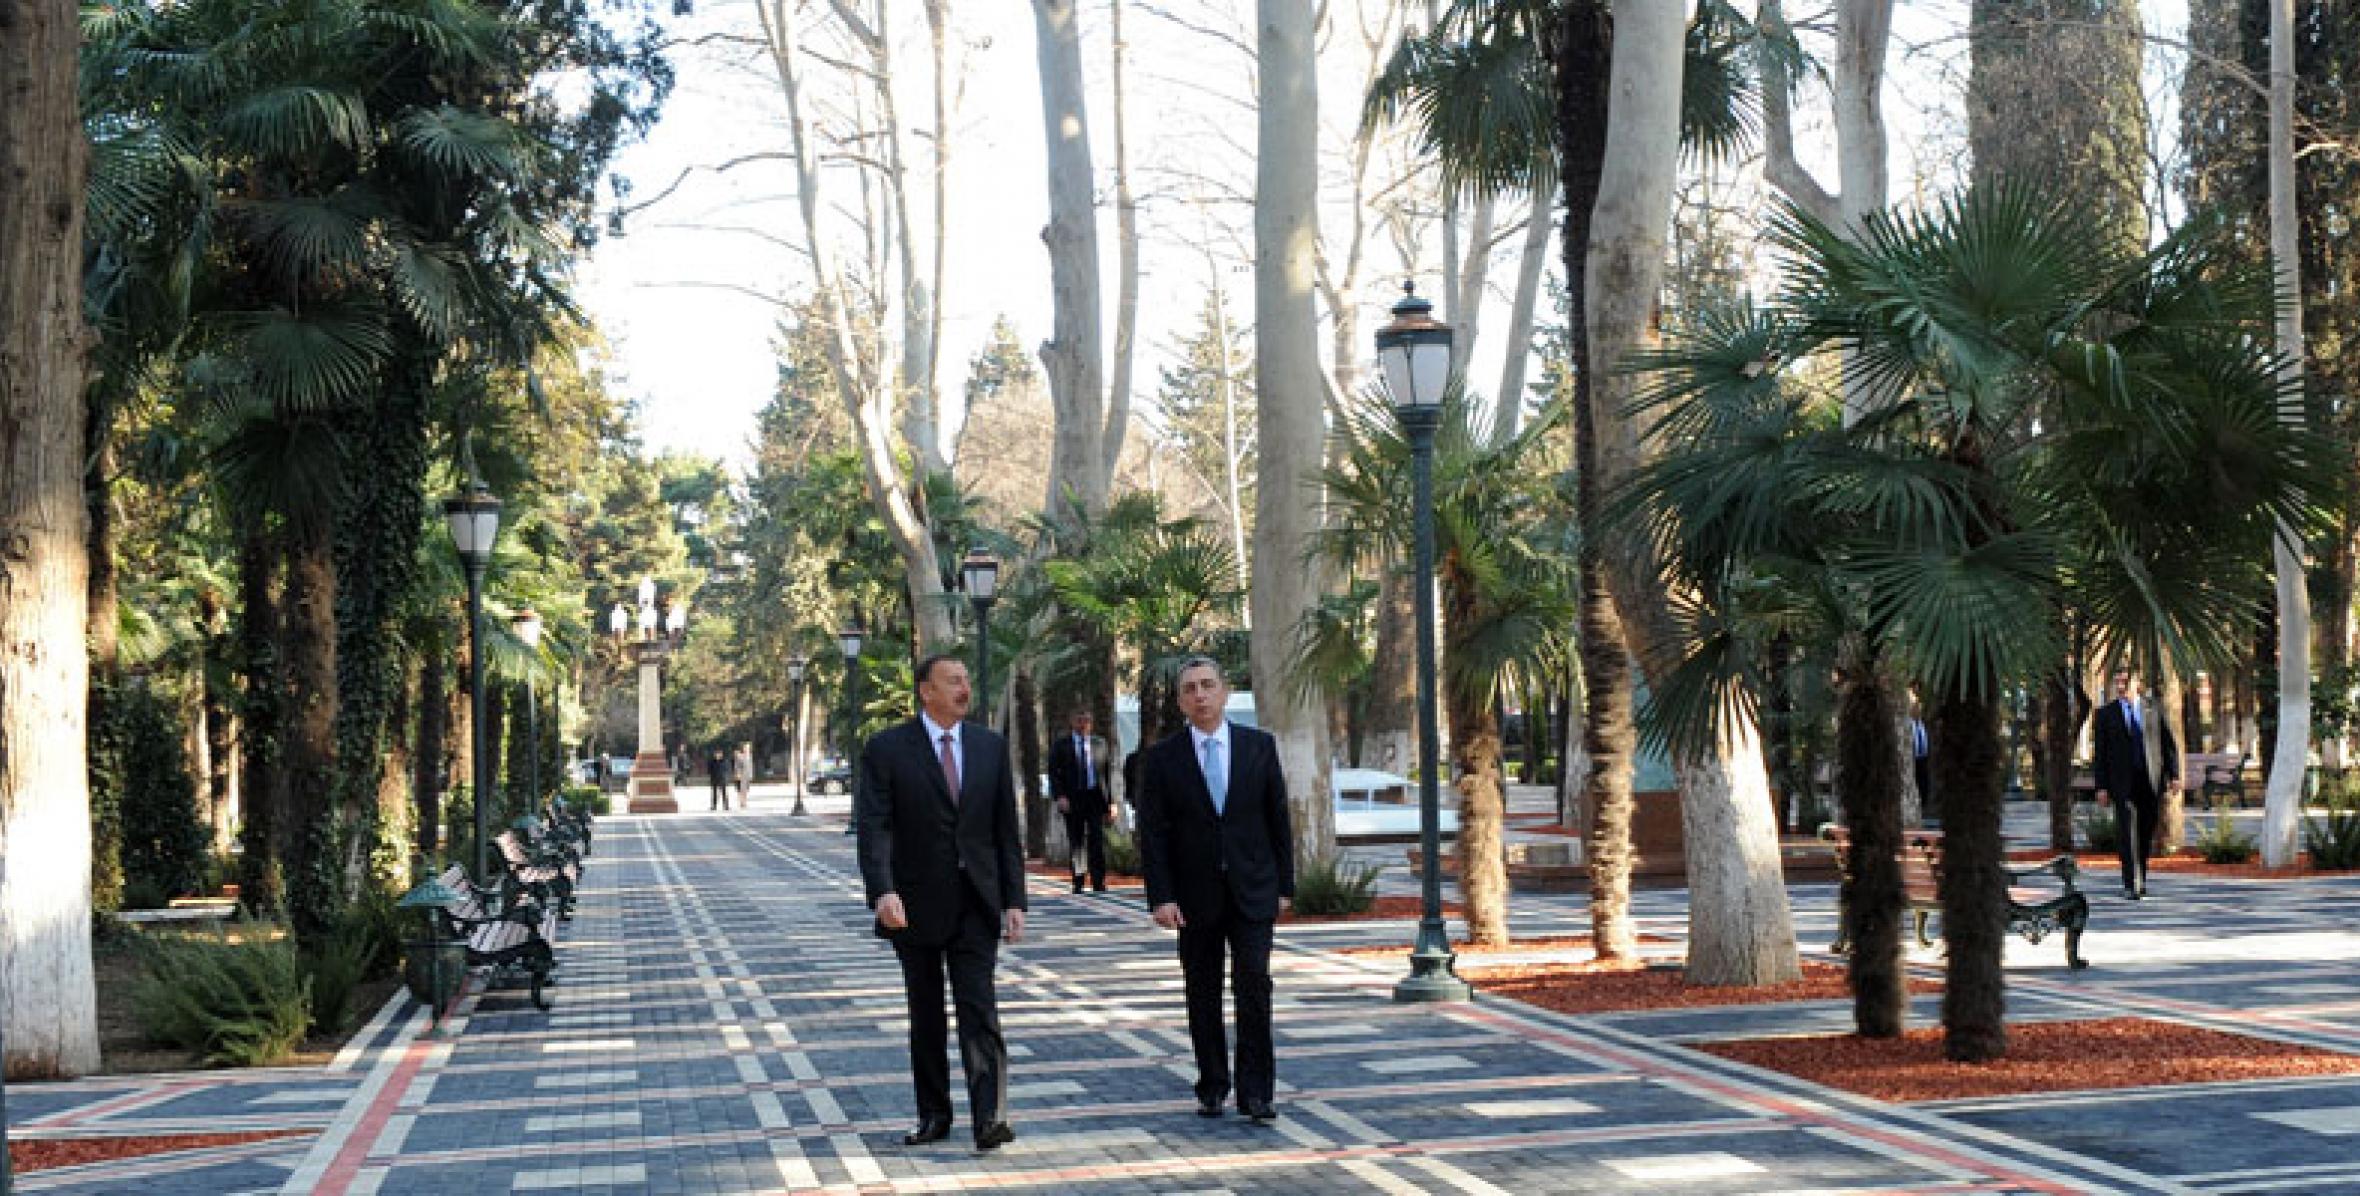 Ilham Aliyev took part in the opening of the “Khan bagi” park of Ganja after its complete restoration